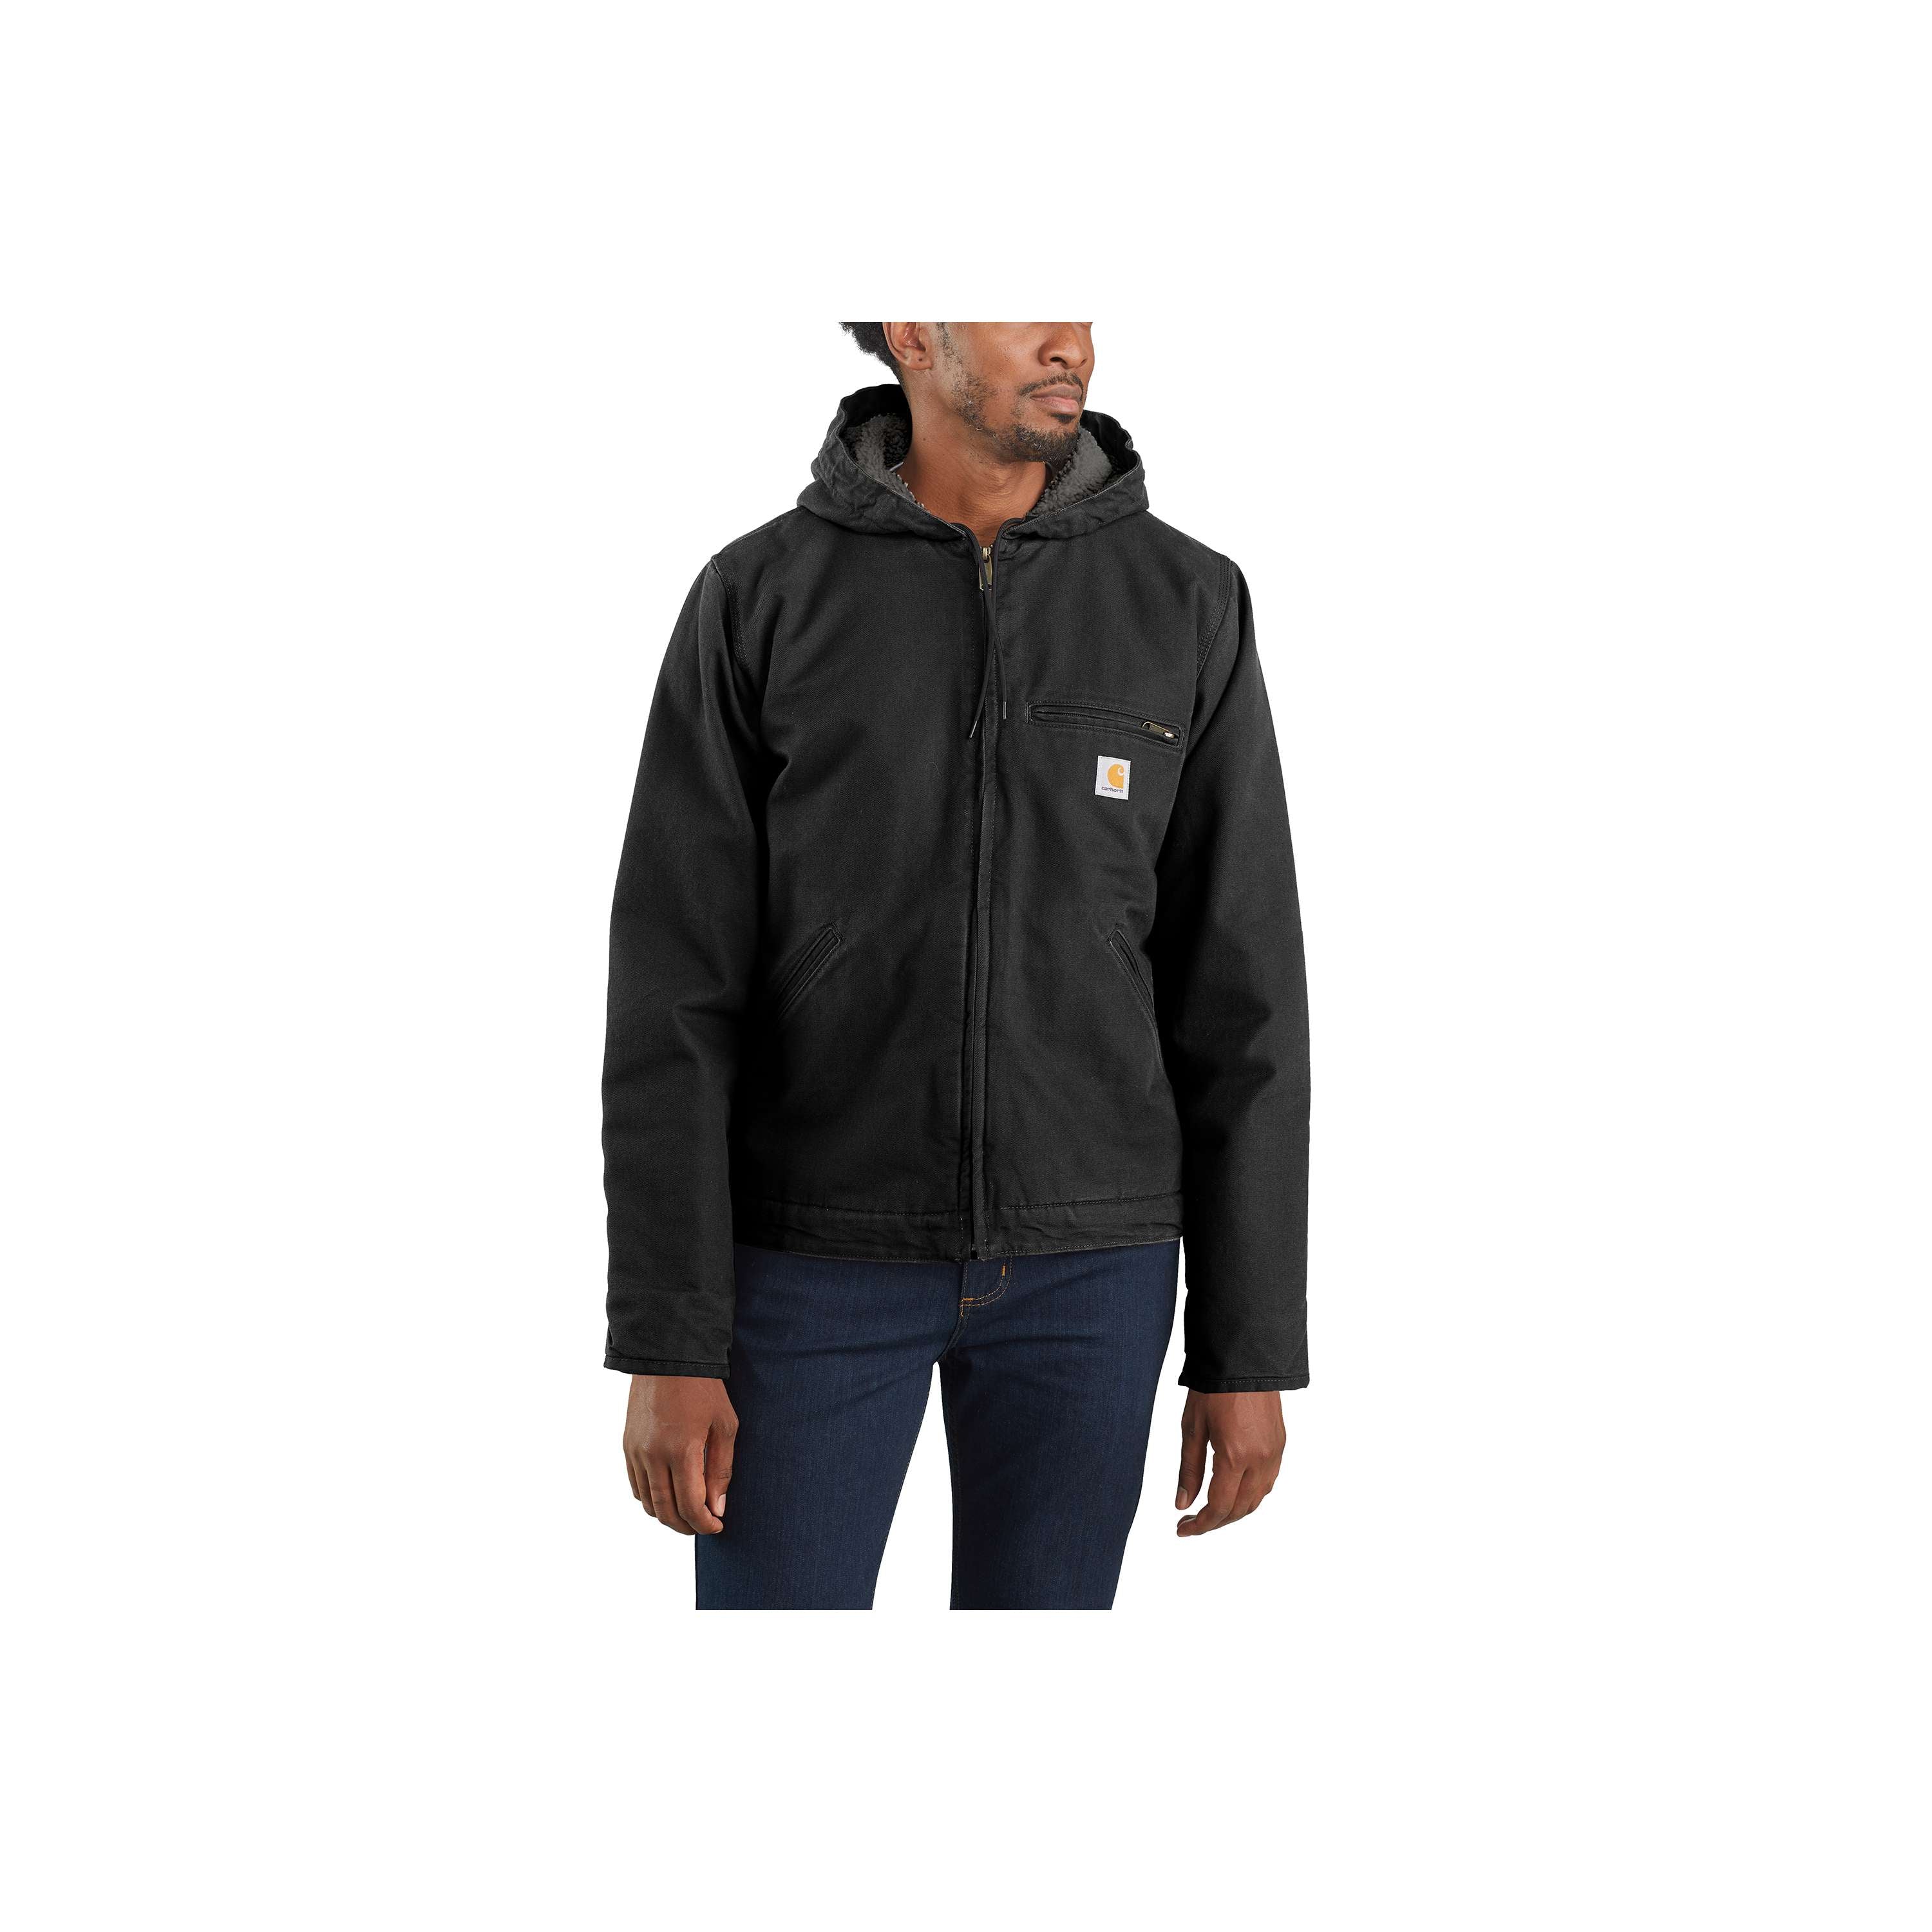 104392 - CARHARTT® WASHED DUCK SHERPA LINED JACKET – Marshlands Canada  Factory Outlet